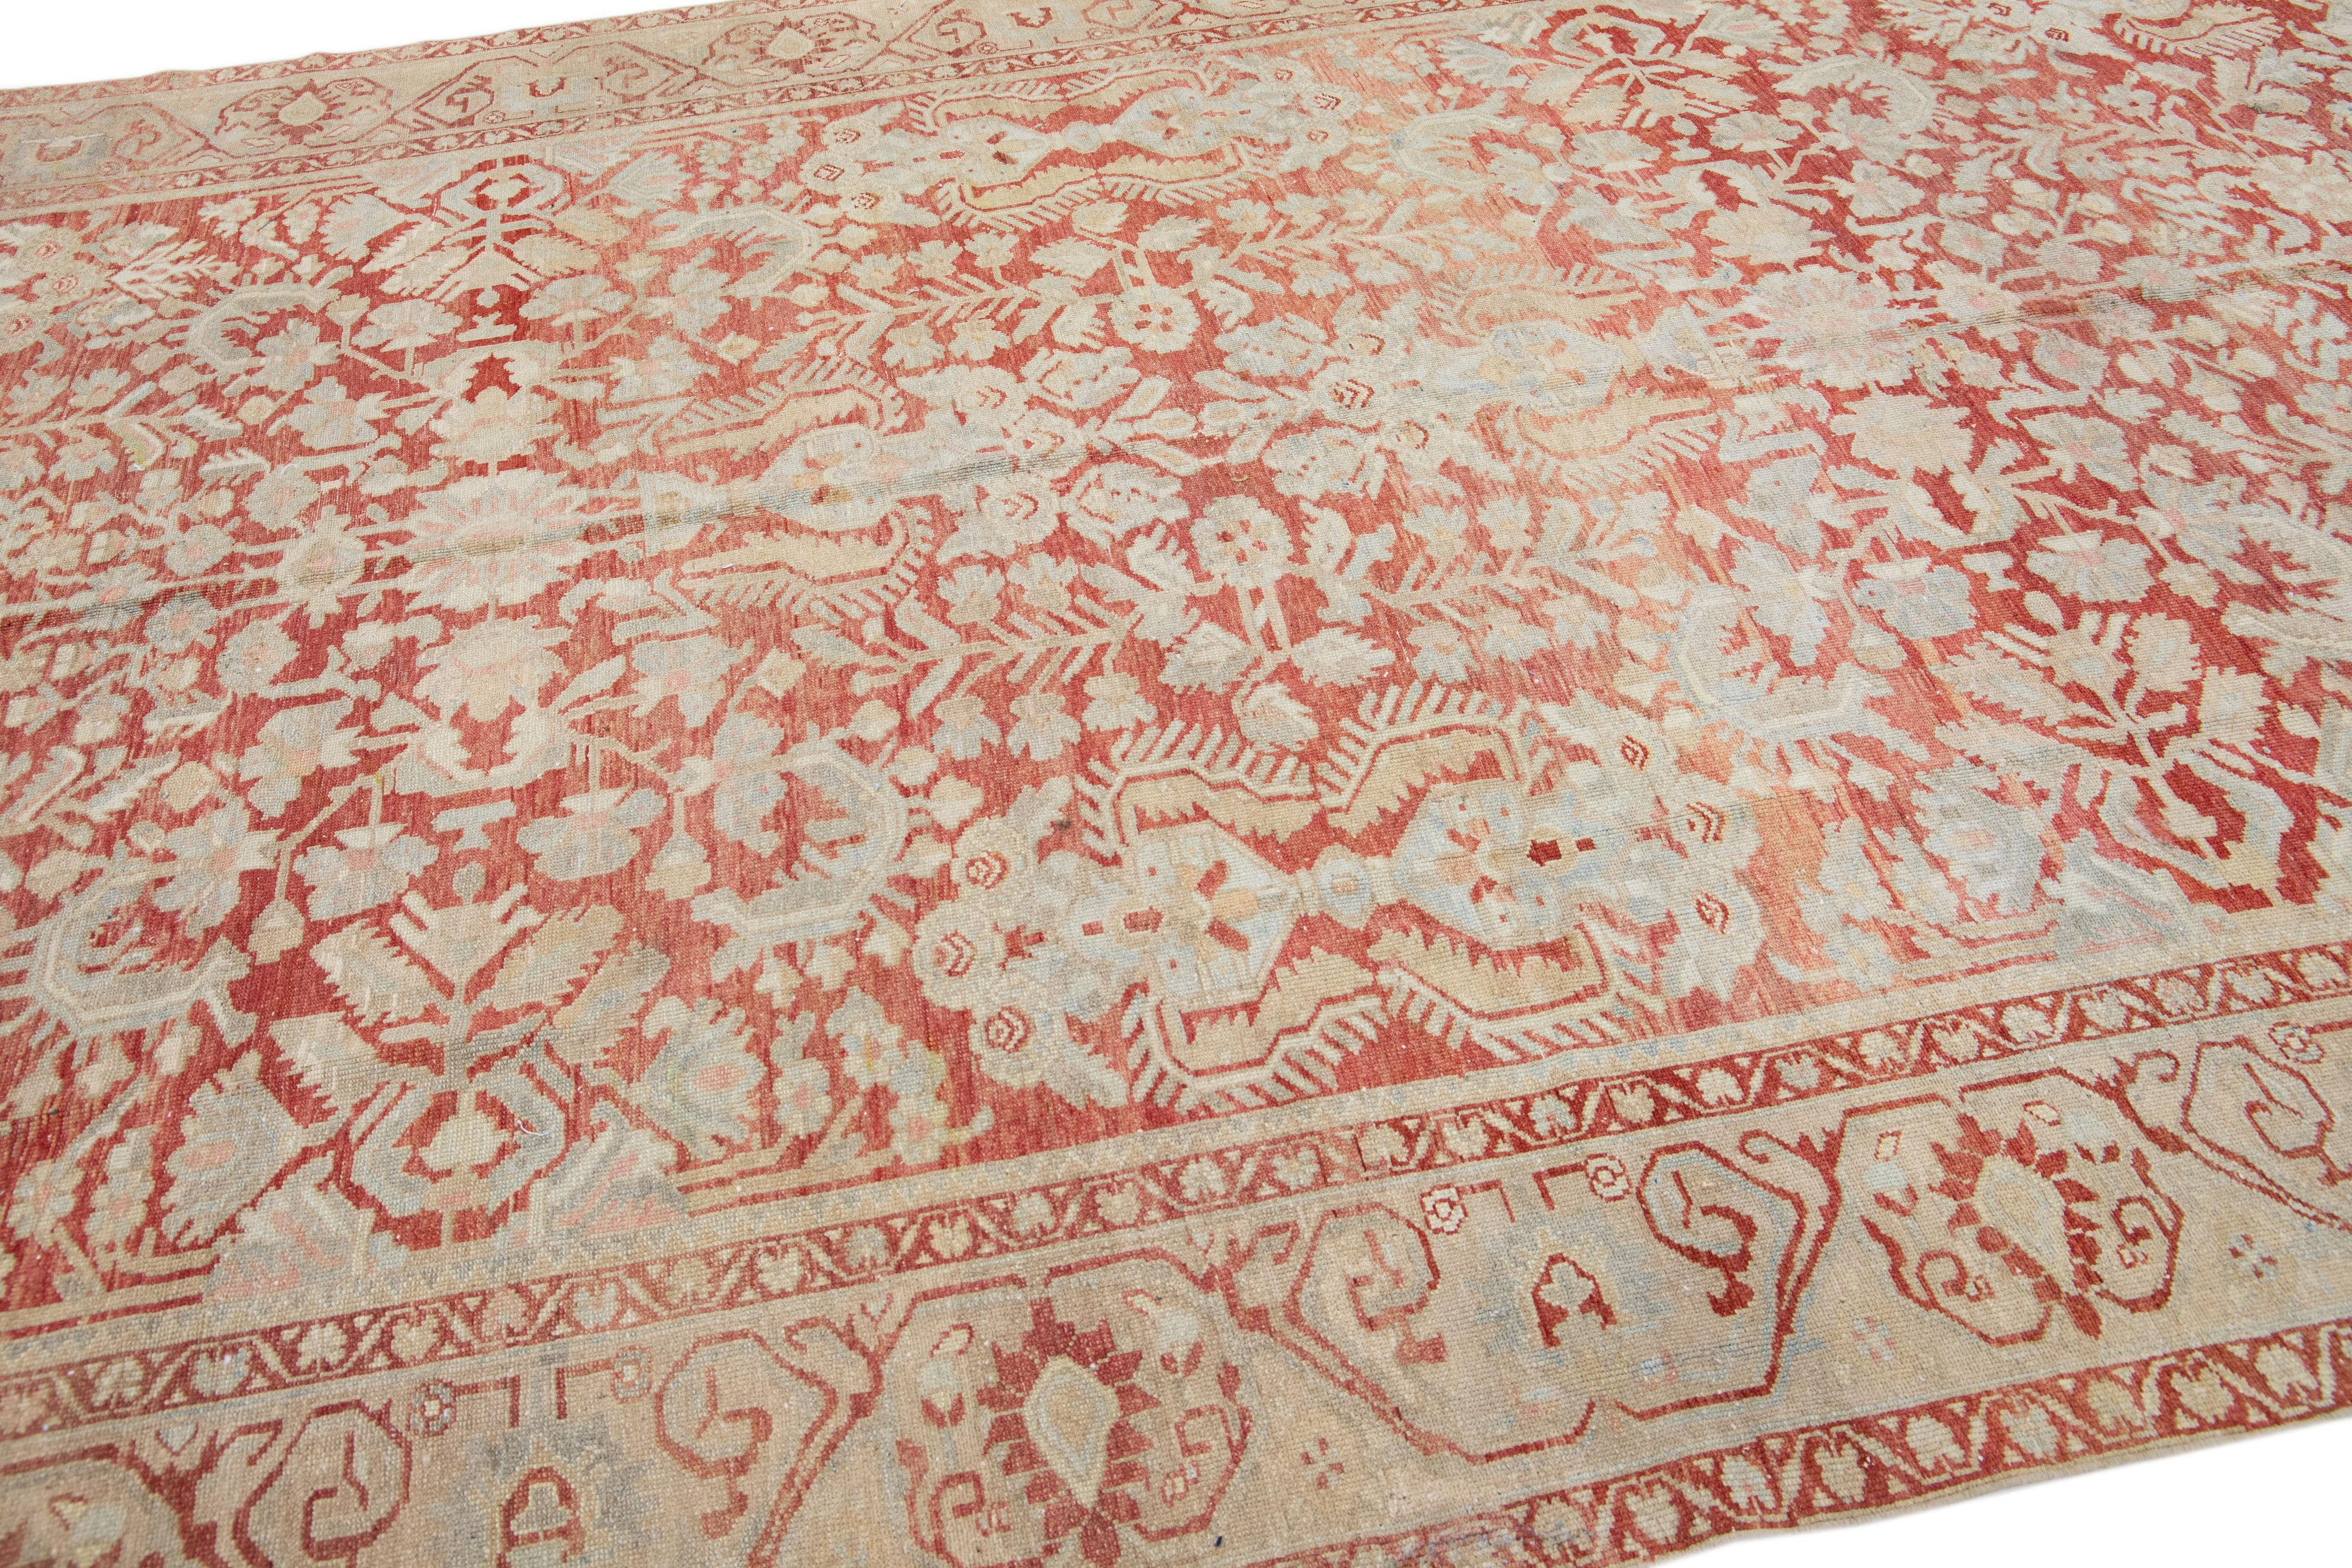 Floral Handmade Antique Persian Malayer Room Size Wool Rug in Rust In Good Condition For Sale In Norwalk, CT